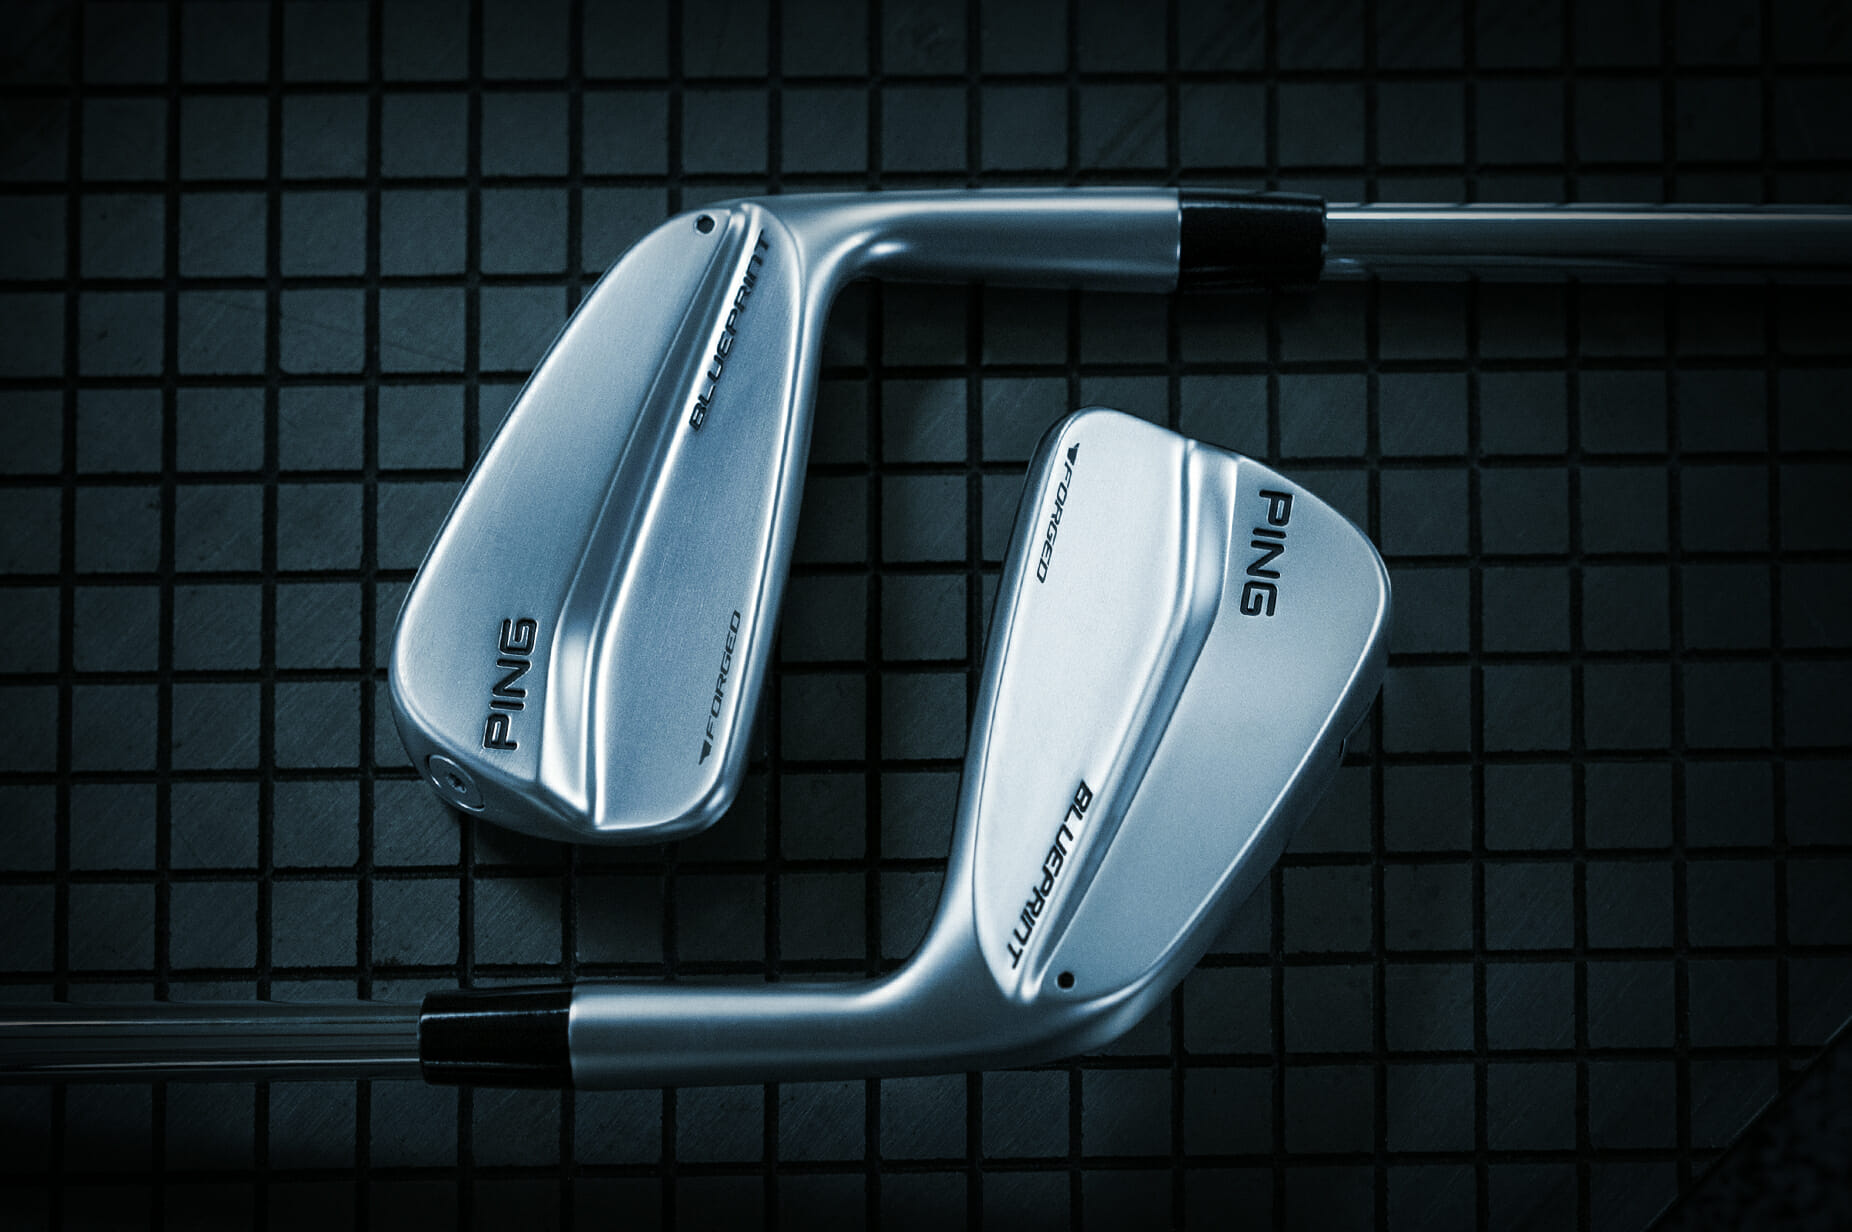 PING introduce the Blueprint for highly skilled golfers